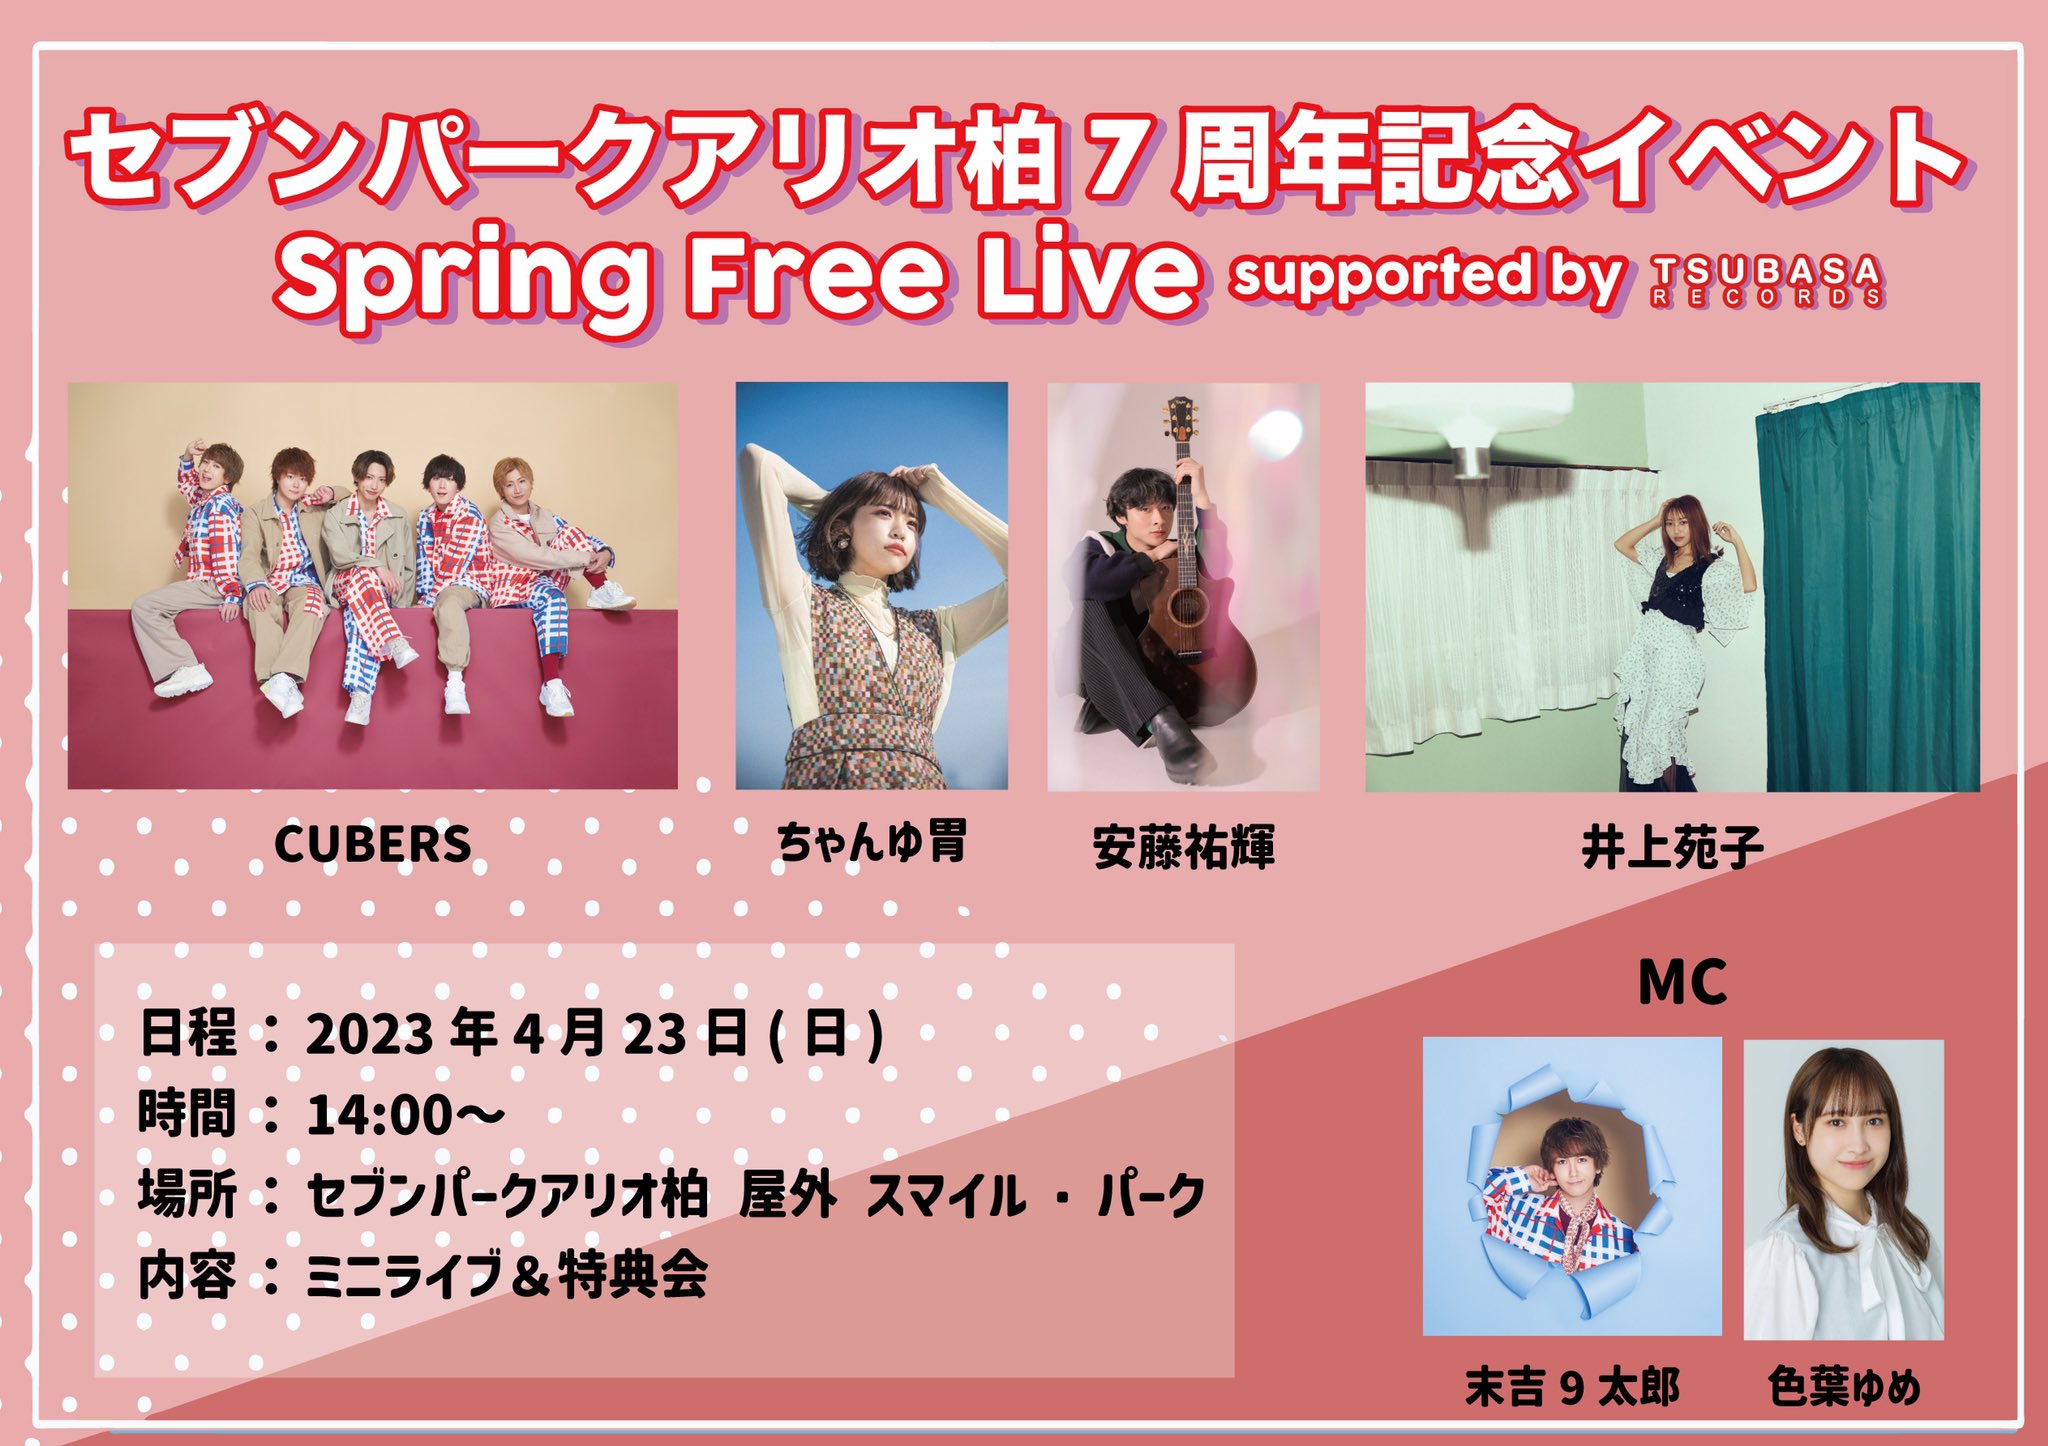 【NEWS】セブンパークアリオ柏7周年記念イベント「Spring Free Live supported by TSUBASA RECORDS」開催決定！！